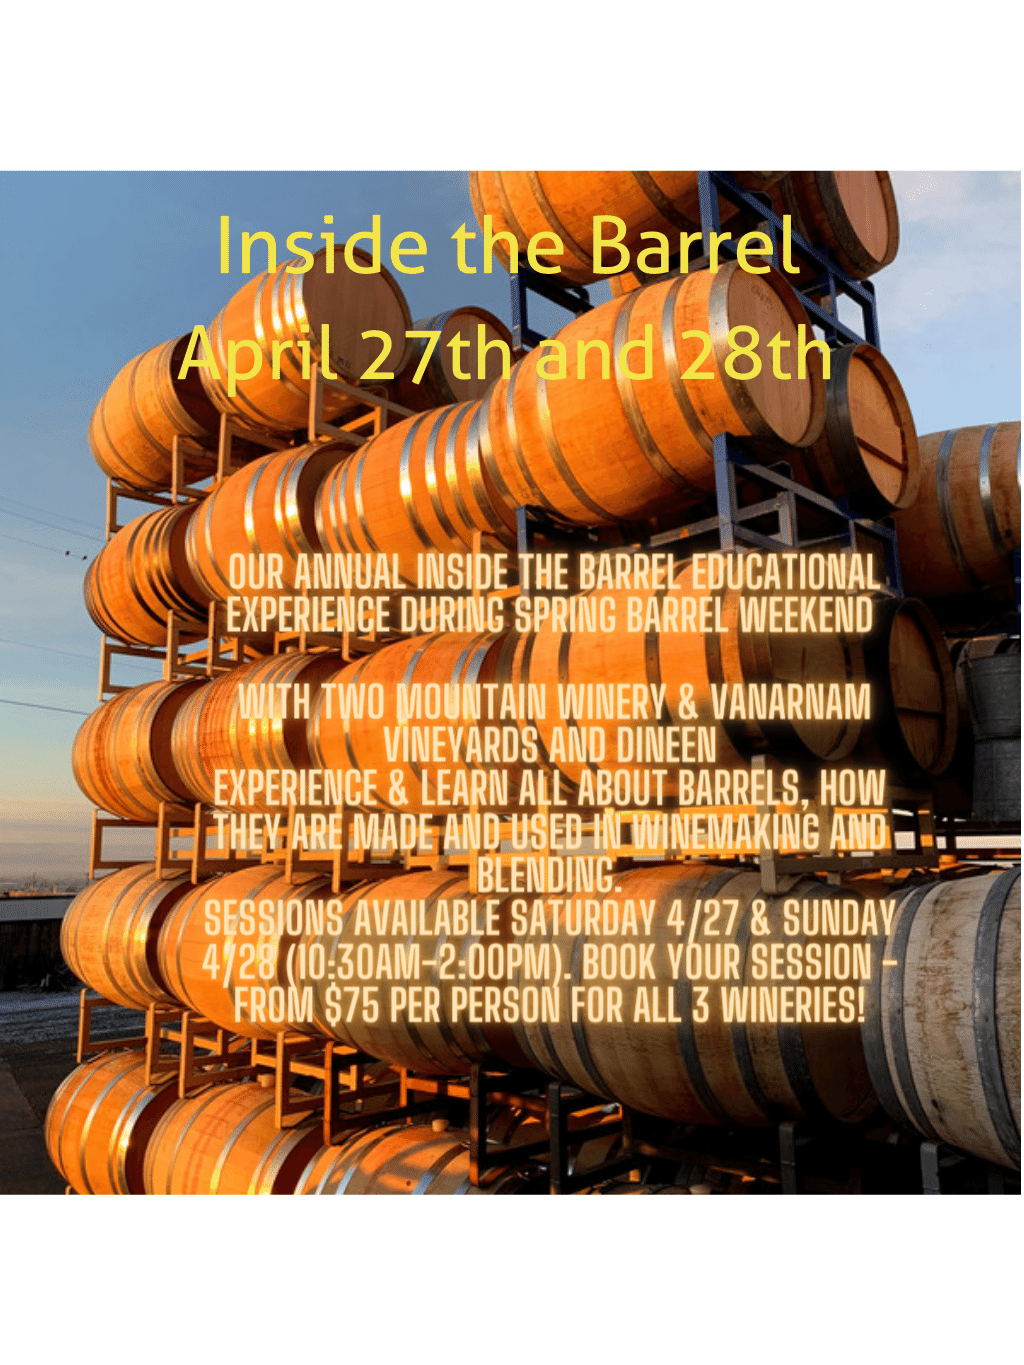 Product Image for Inside the Barrel Saturday, April 27th